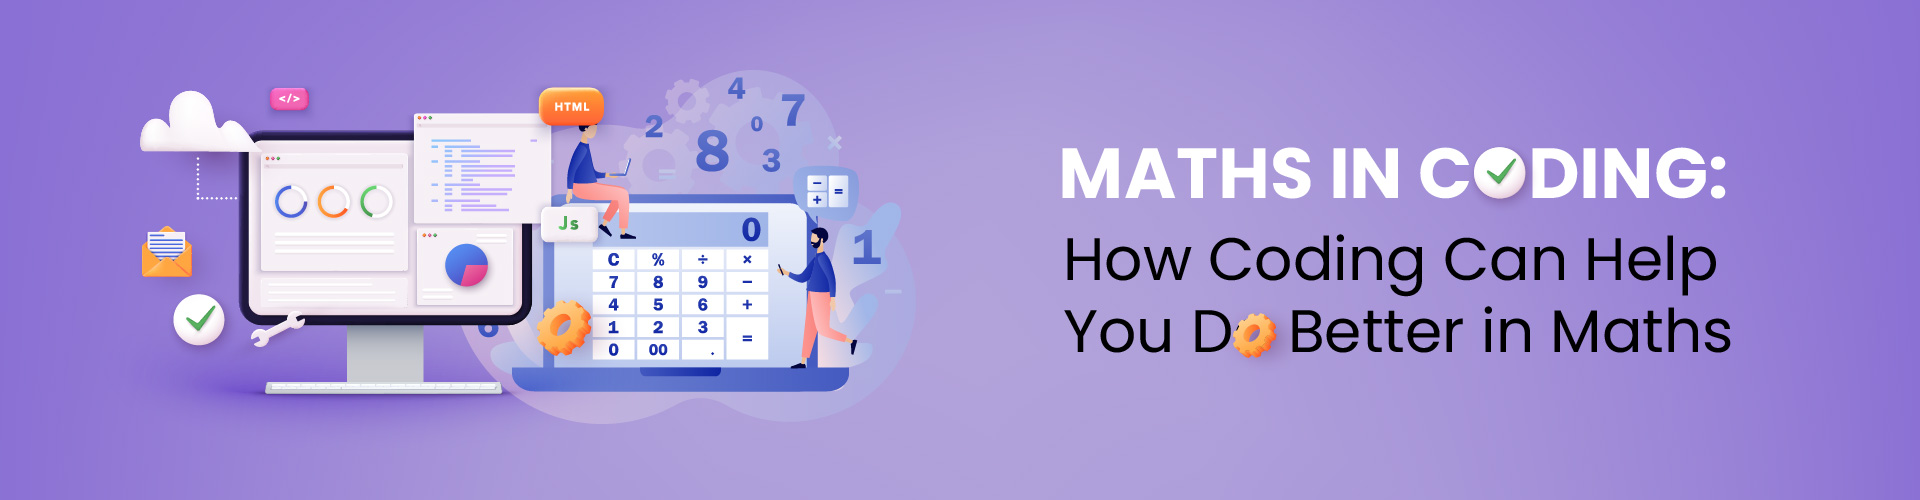 Math in Coding: How Coding Can Help You Do Better in Math